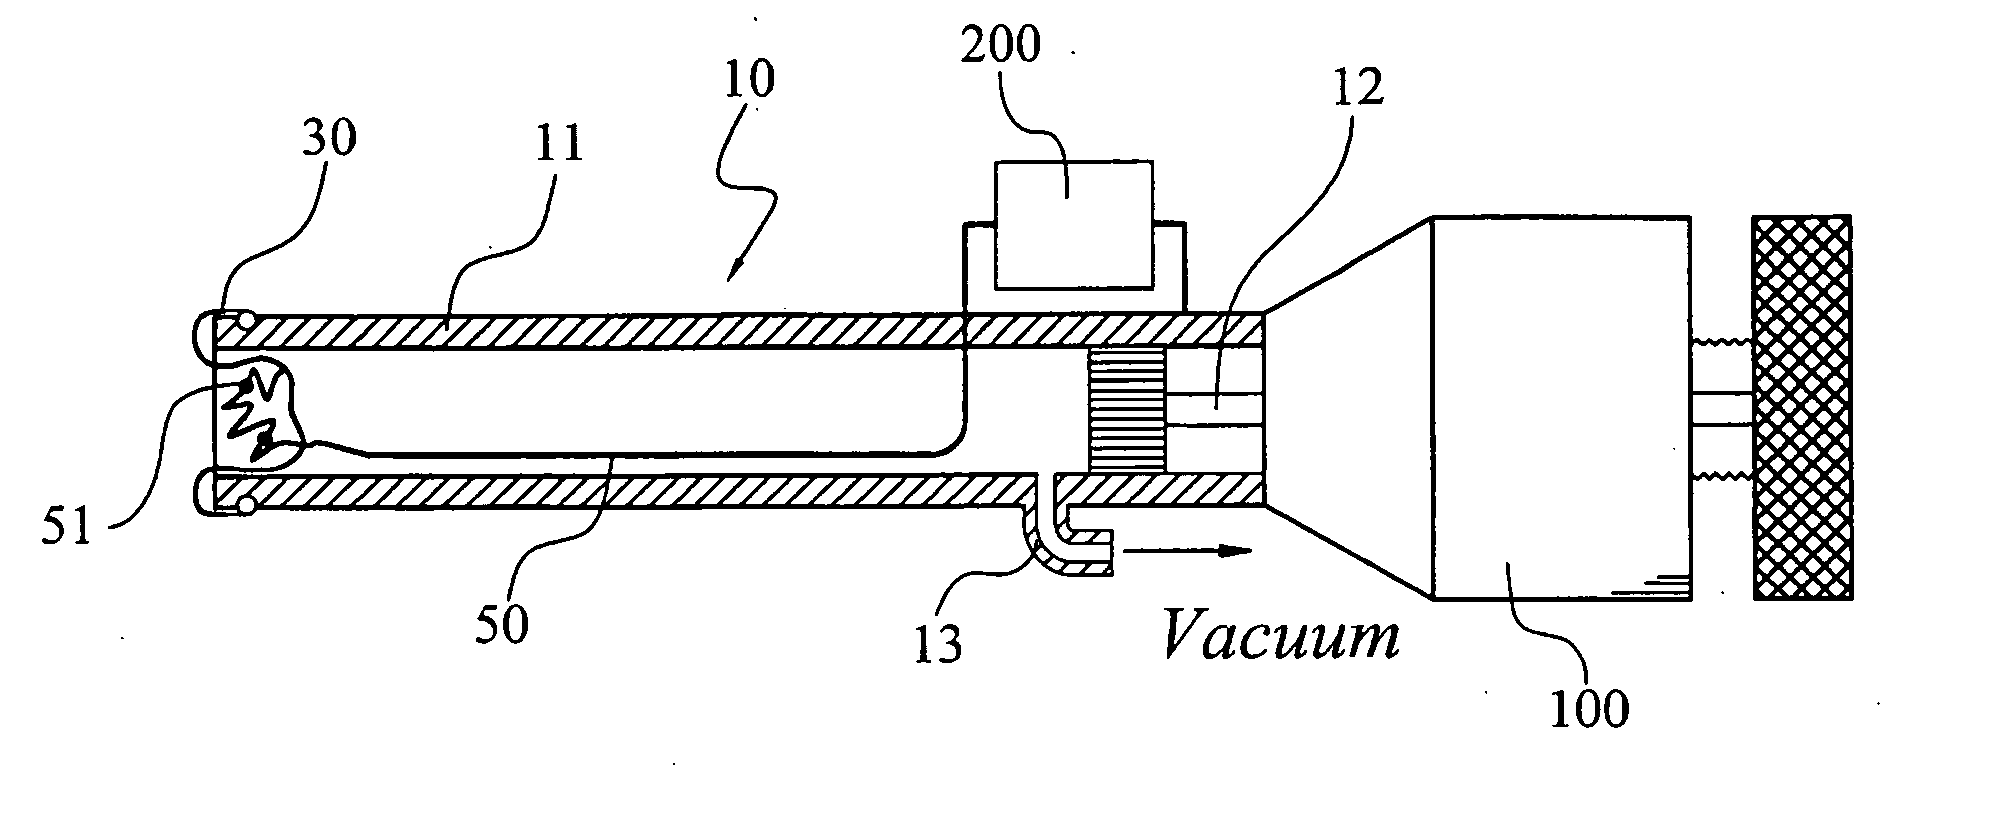 Device for forming a hardened cement in a bone cavity